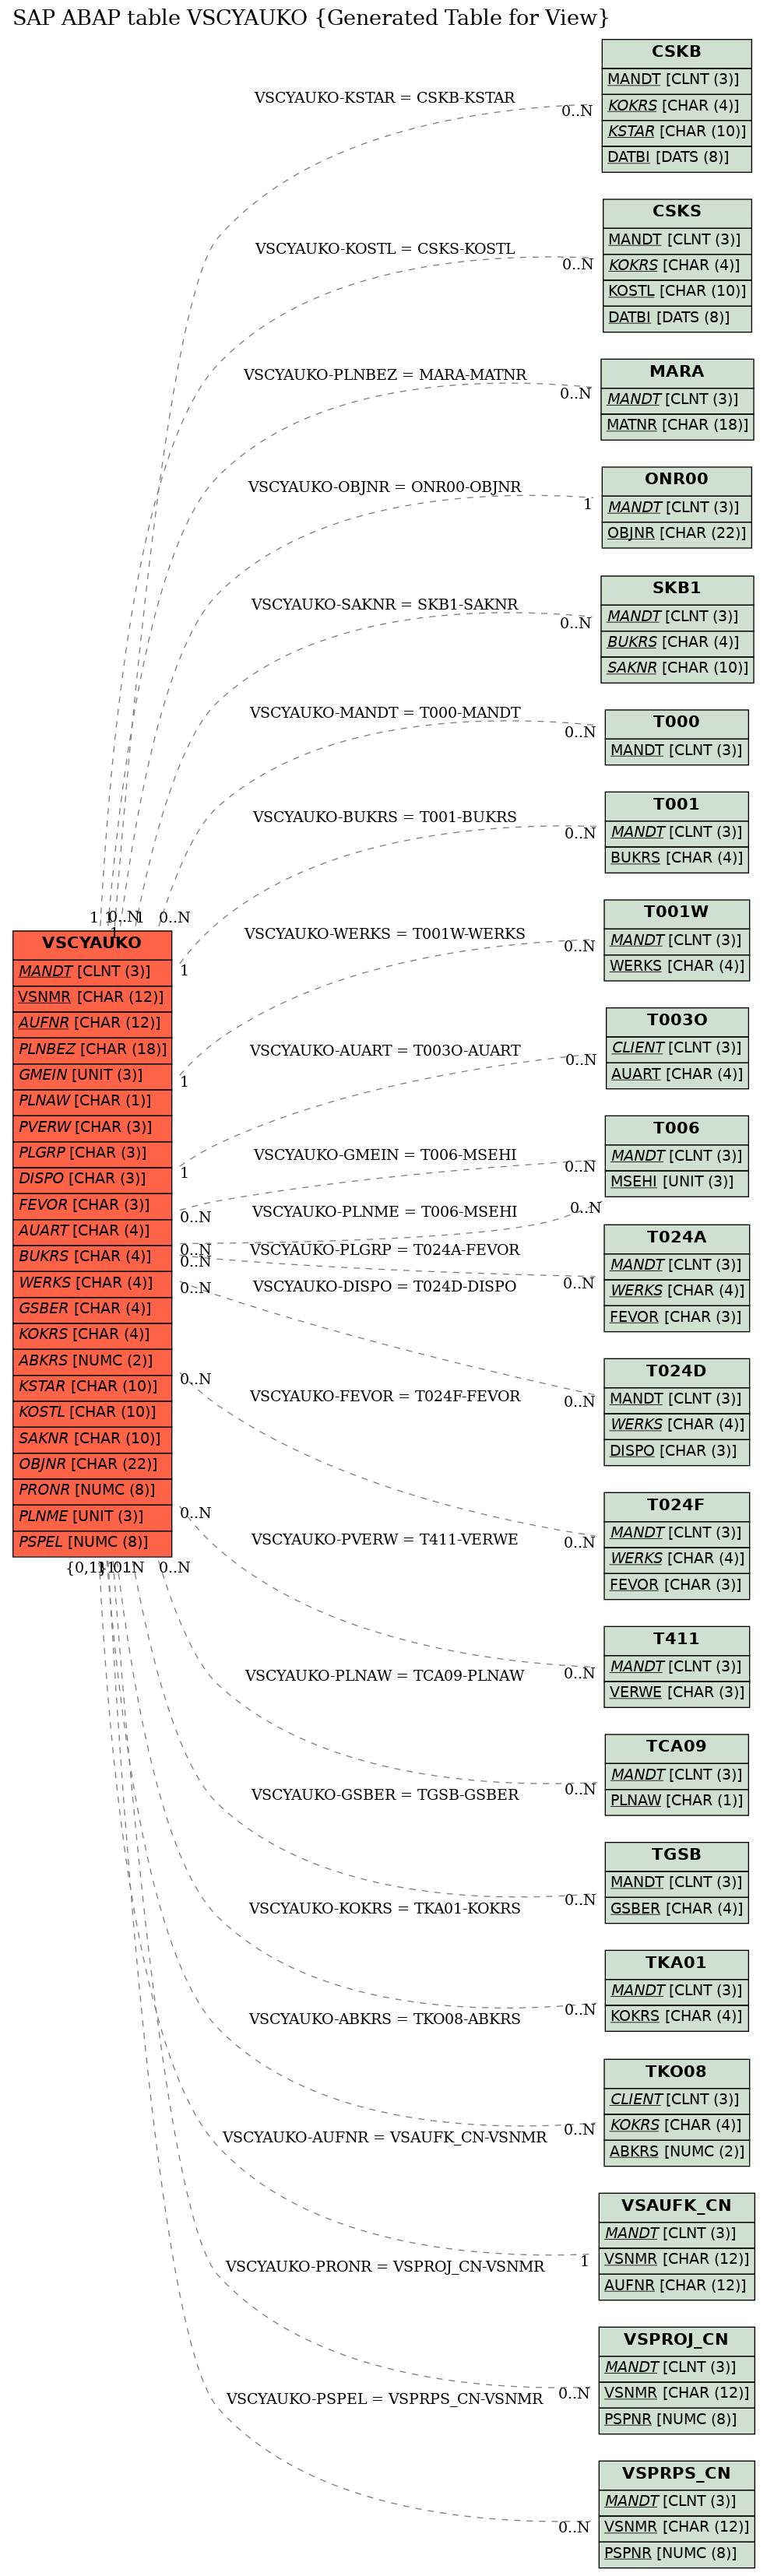 E-R Diagram for table VSCYAUKO (Generated Table for View)